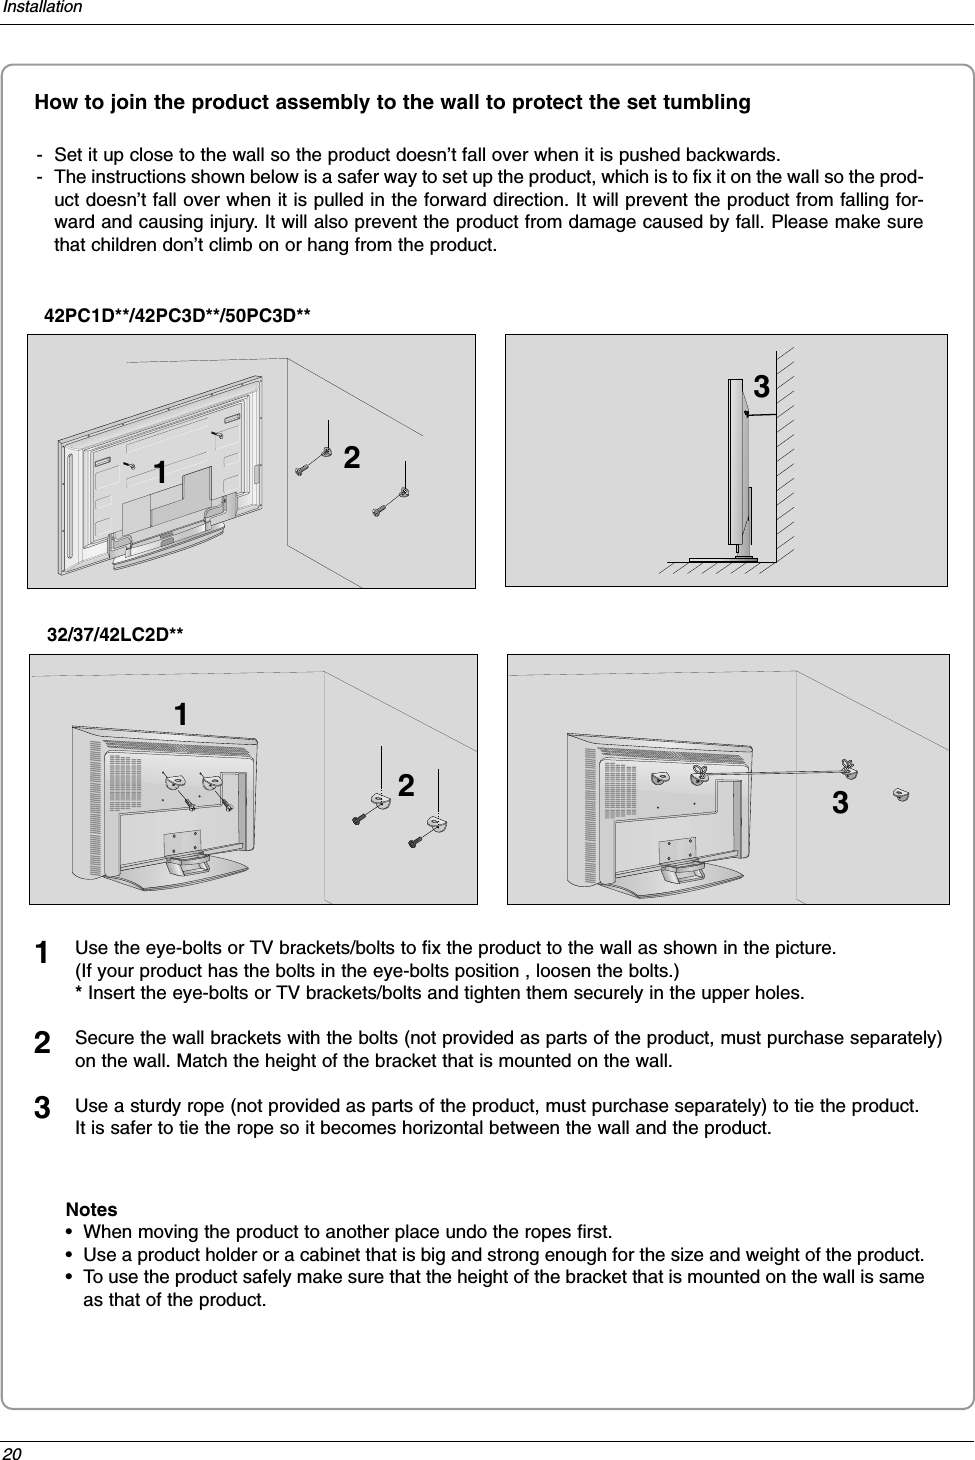 20InstallationHow to join the product assembly to the wall to protect the set tumbling- Set it up close to the wall so the product doesn’t fall over when it is pushed backwards. - The instructions shown below is a safer way to set up the product, which is to fix it on the wall so the prod-uct doesn’t fall over when it is pulled in the forward direction. It will prevent the product from falling for-ward and causing injury. It will also prevent the product from damage caused by fall. Please make surethat children don’t climb on or hang from the product. 42PC1D**/42PC3D**/50PC3D**Notes•When moving the product to another place undo the ropes first.•Use a product holder or a cabinet that is big and strong enough for the size and weight of the product. •To use the product safely make sure that the height of the bracket that is mounted on the wall is sameas that of the product. 2 2 3113Use the eye-bolts or TV brackets/bolts to fix the product to the wall as shown in the picture. (If your product has the bolts in the eye-bolts position , loosen the bolts.)* Insert the eye-bolts or TV brackets/bolts and tighten them securely in the upper holes.Secure the wall brackets with the bolts (not provided as parts of the product, must purchase separately)on the wall. Match the height of the bracket that is mounted on the wall.Use a sturdy rope (not provided as parts of the product, must purchase separately) to tie the product. It is safer to tie the rope so it becomes horizontal between the wall and the product.12332/37/42LC2D**